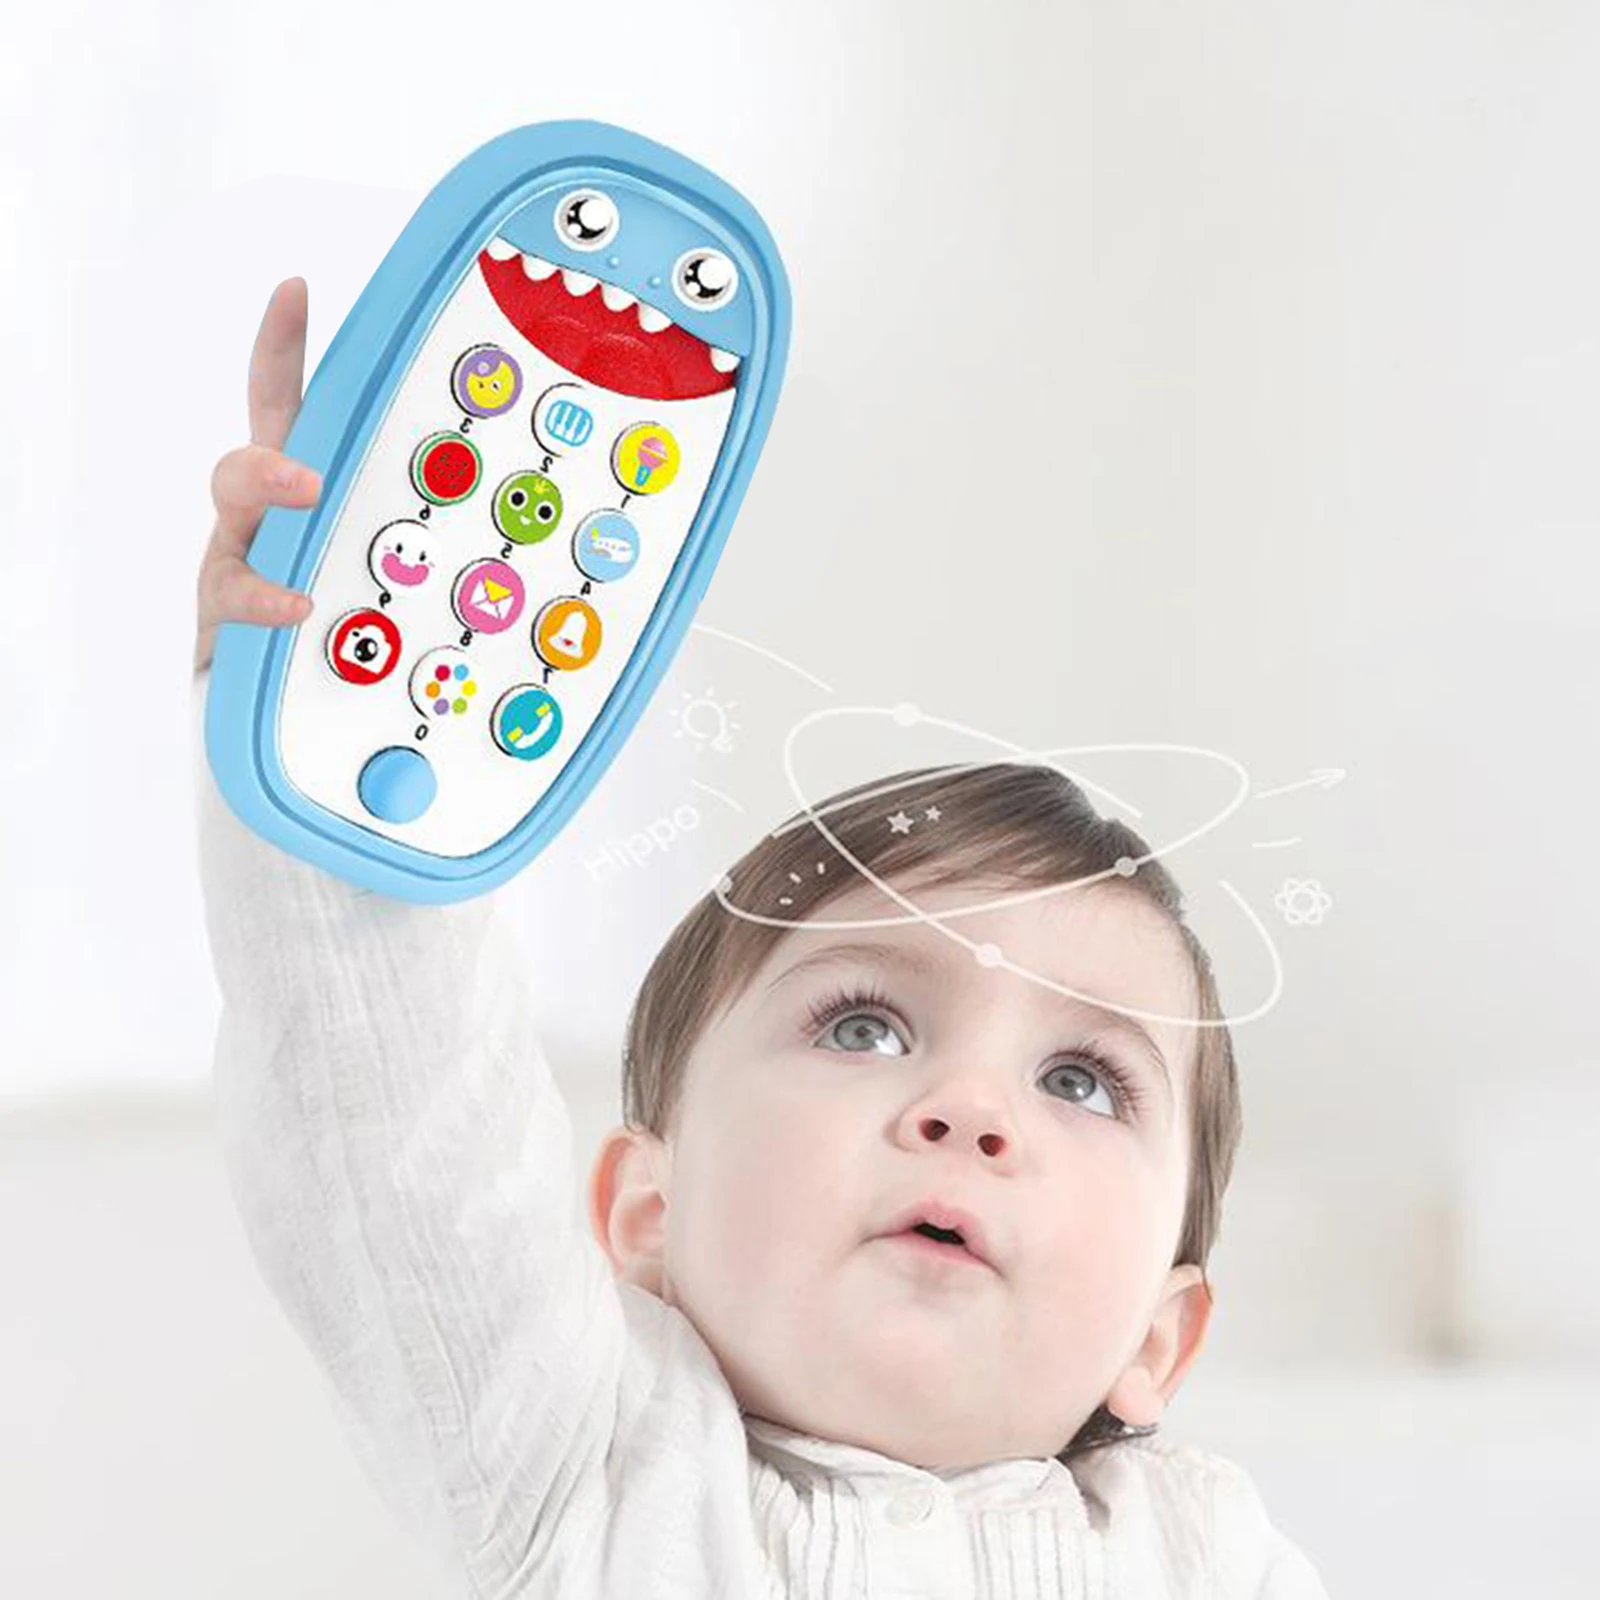 Cute Baby Intelligent Teething Phone Toy Adjustable Volume Educational Toys Cell Phone Smartphone Touch Swipe Boys Girls Gift